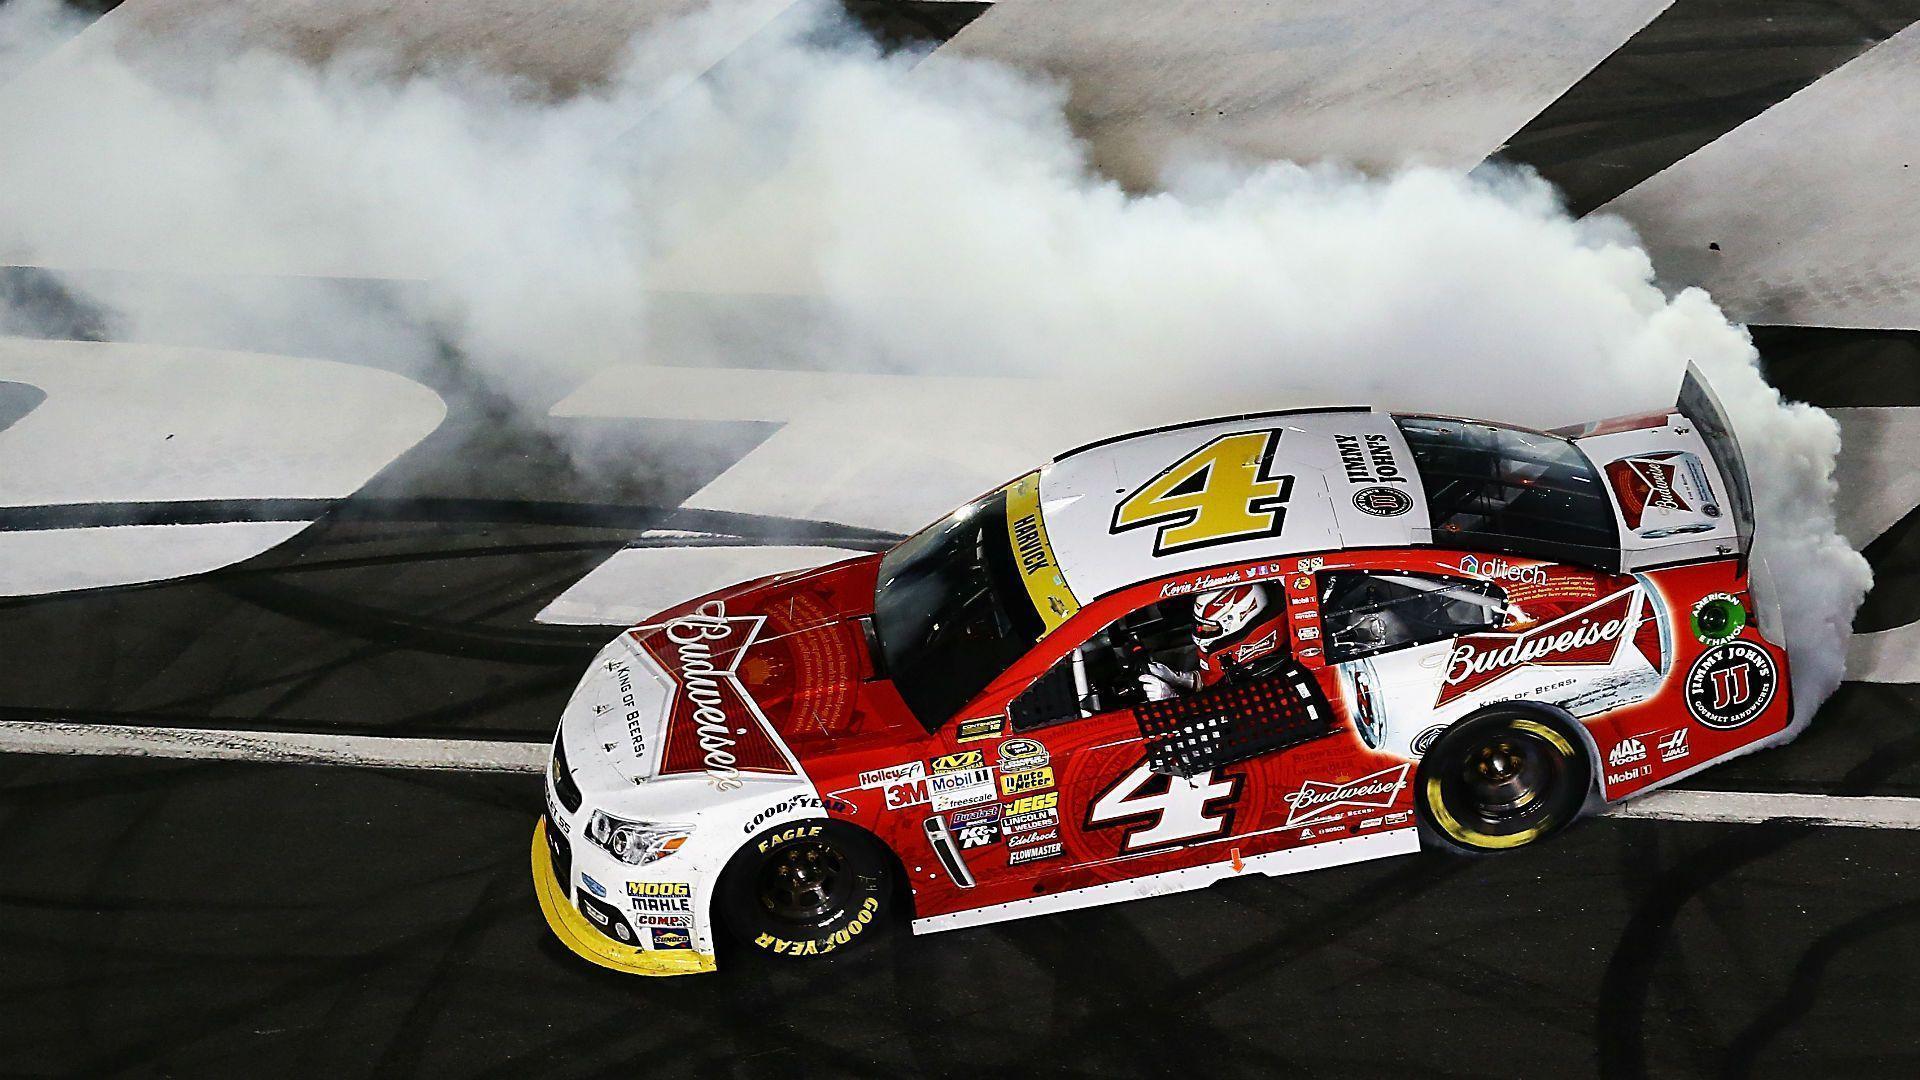 Kevin Harvick wins as fight erupts after Cup race at Charlotte